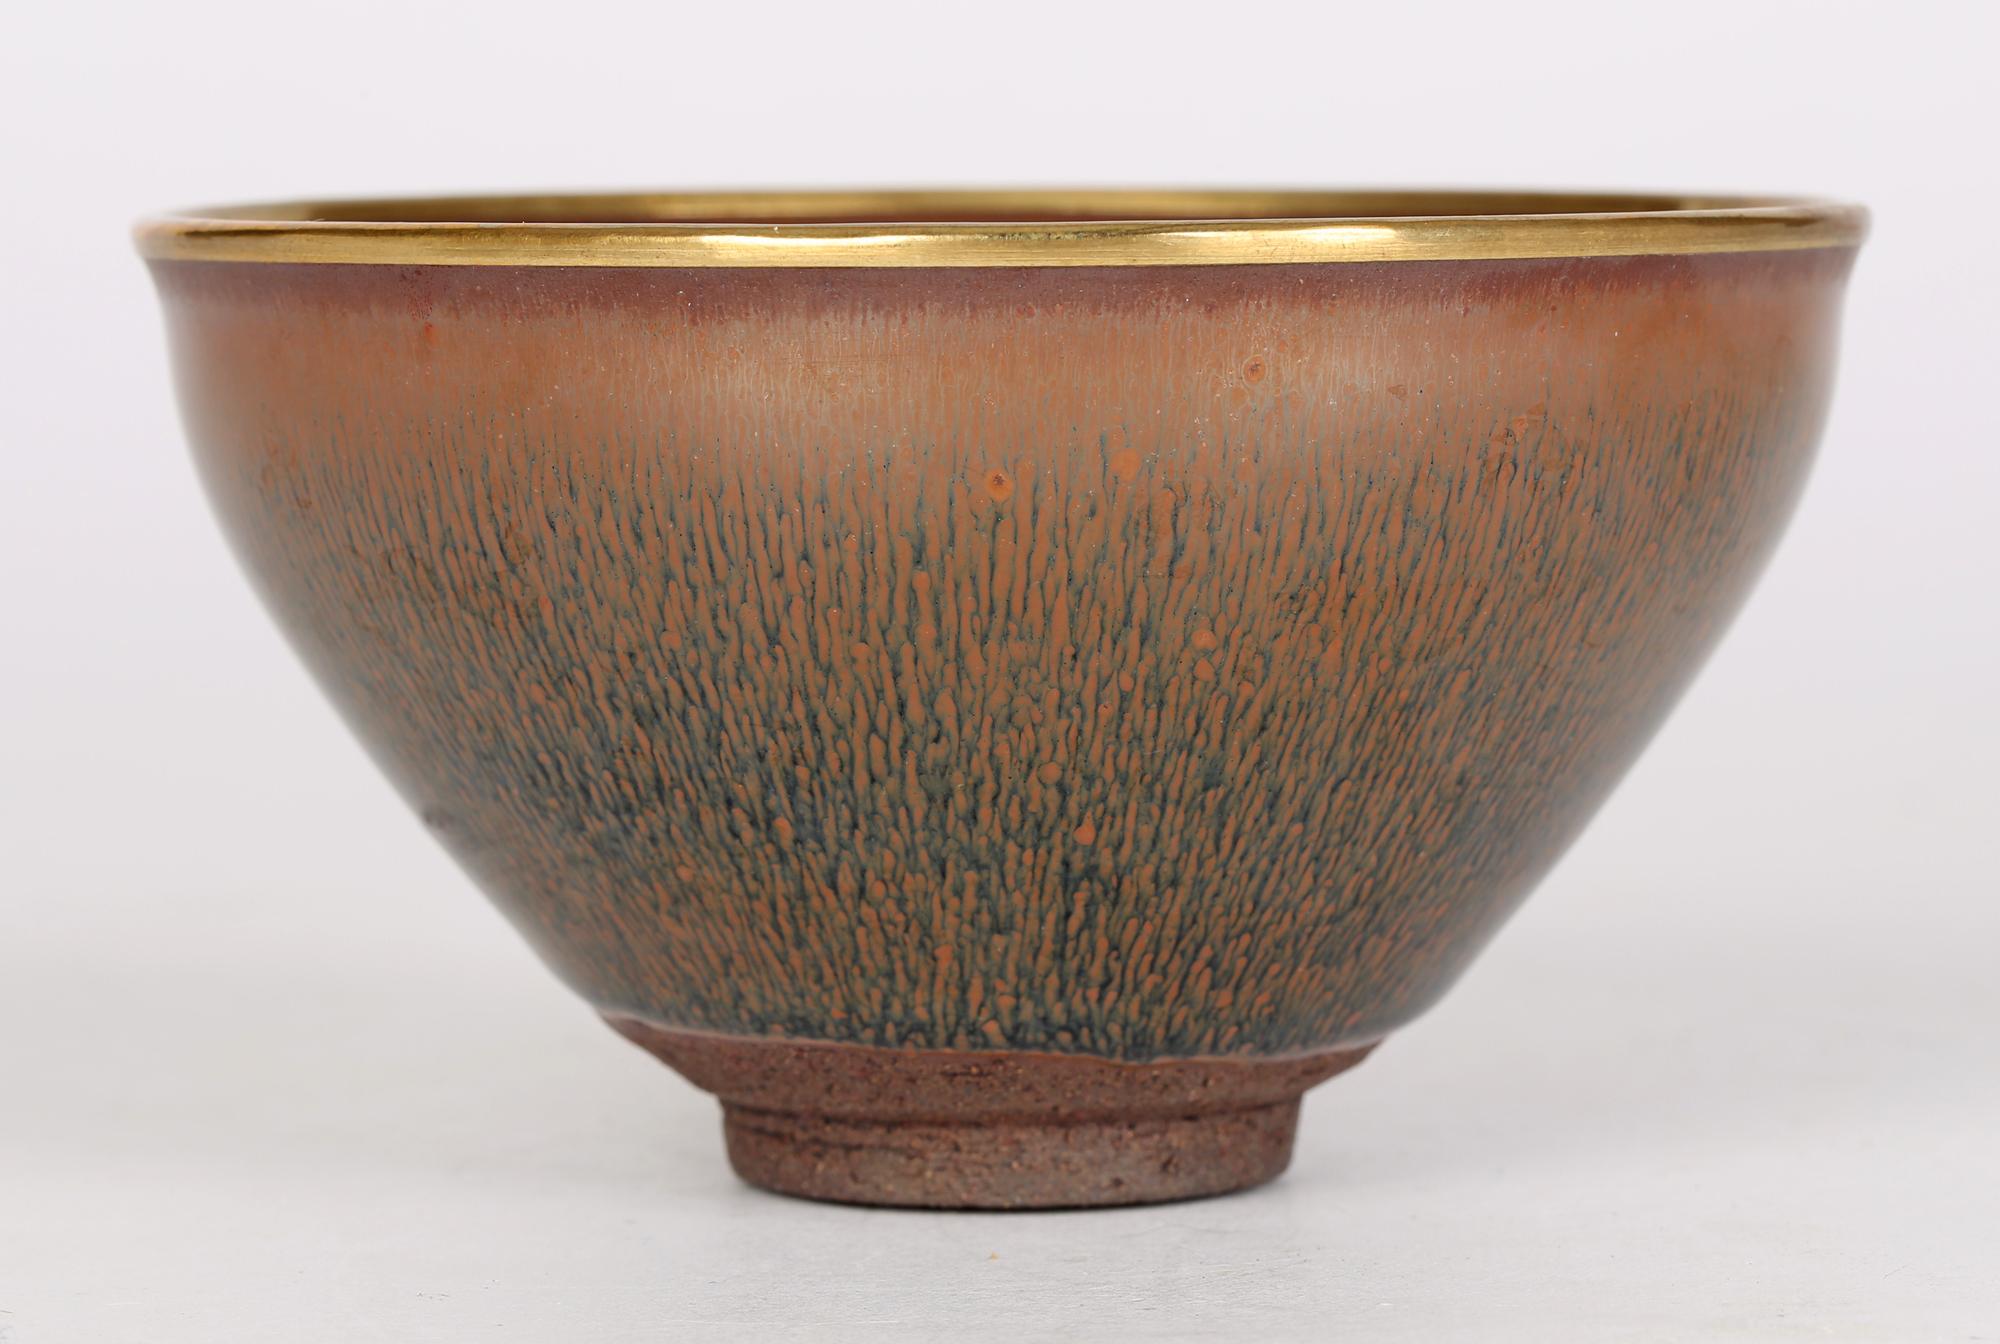 Chinese Export Chinese Jian Ware Style Signed Haresfur Pottery Teabowl with Gilded Rim For Sale